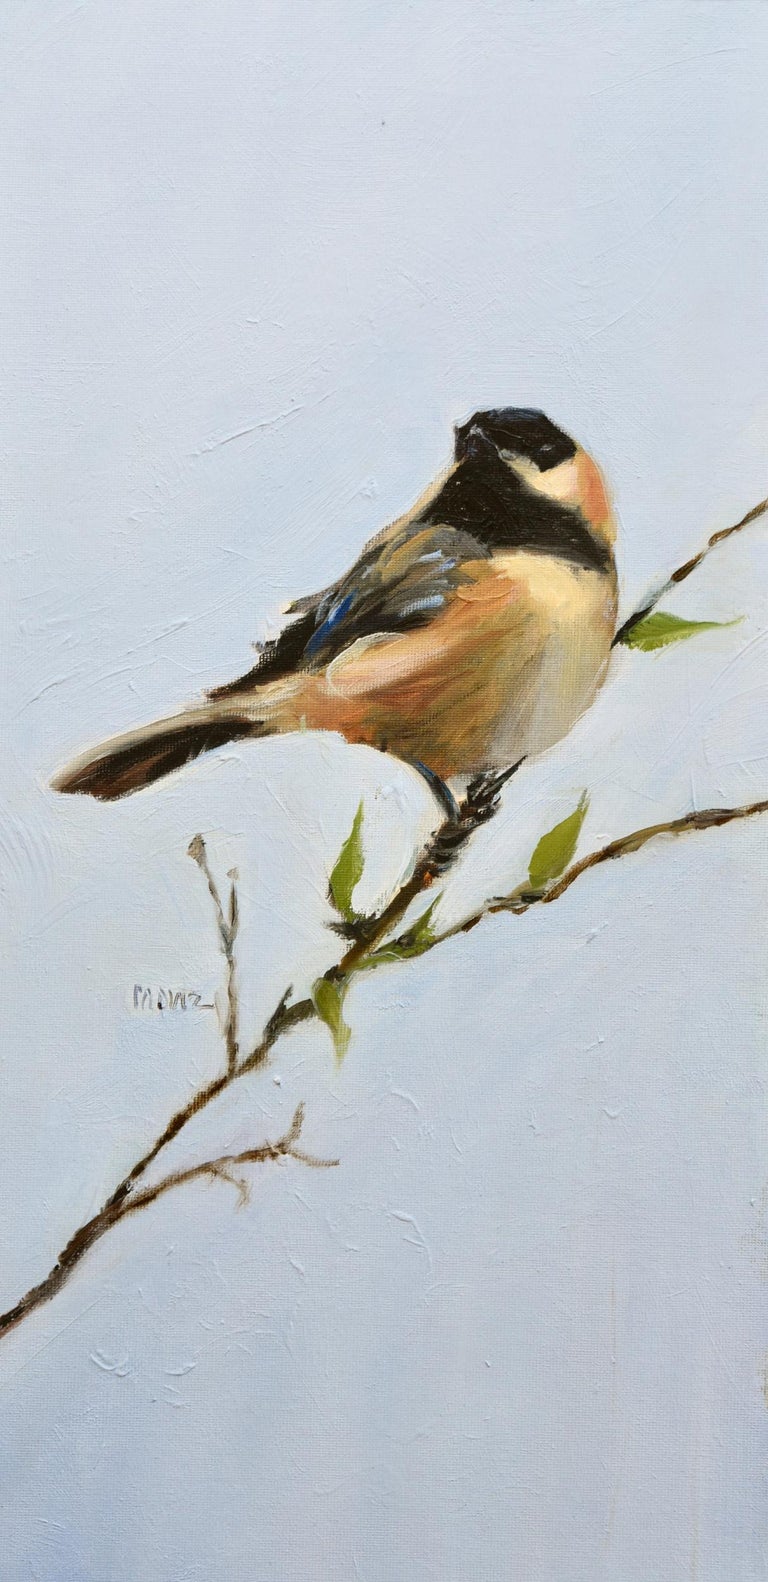 Also shown below are other available paintings by Judy Crowe.
Beautiful Melody is a mockingbird commonly seen in Texas and  painted in the Impressionistic style by Texas artist Judy Crowe.  It is oil on linen and this oil painting by Judy Crowe